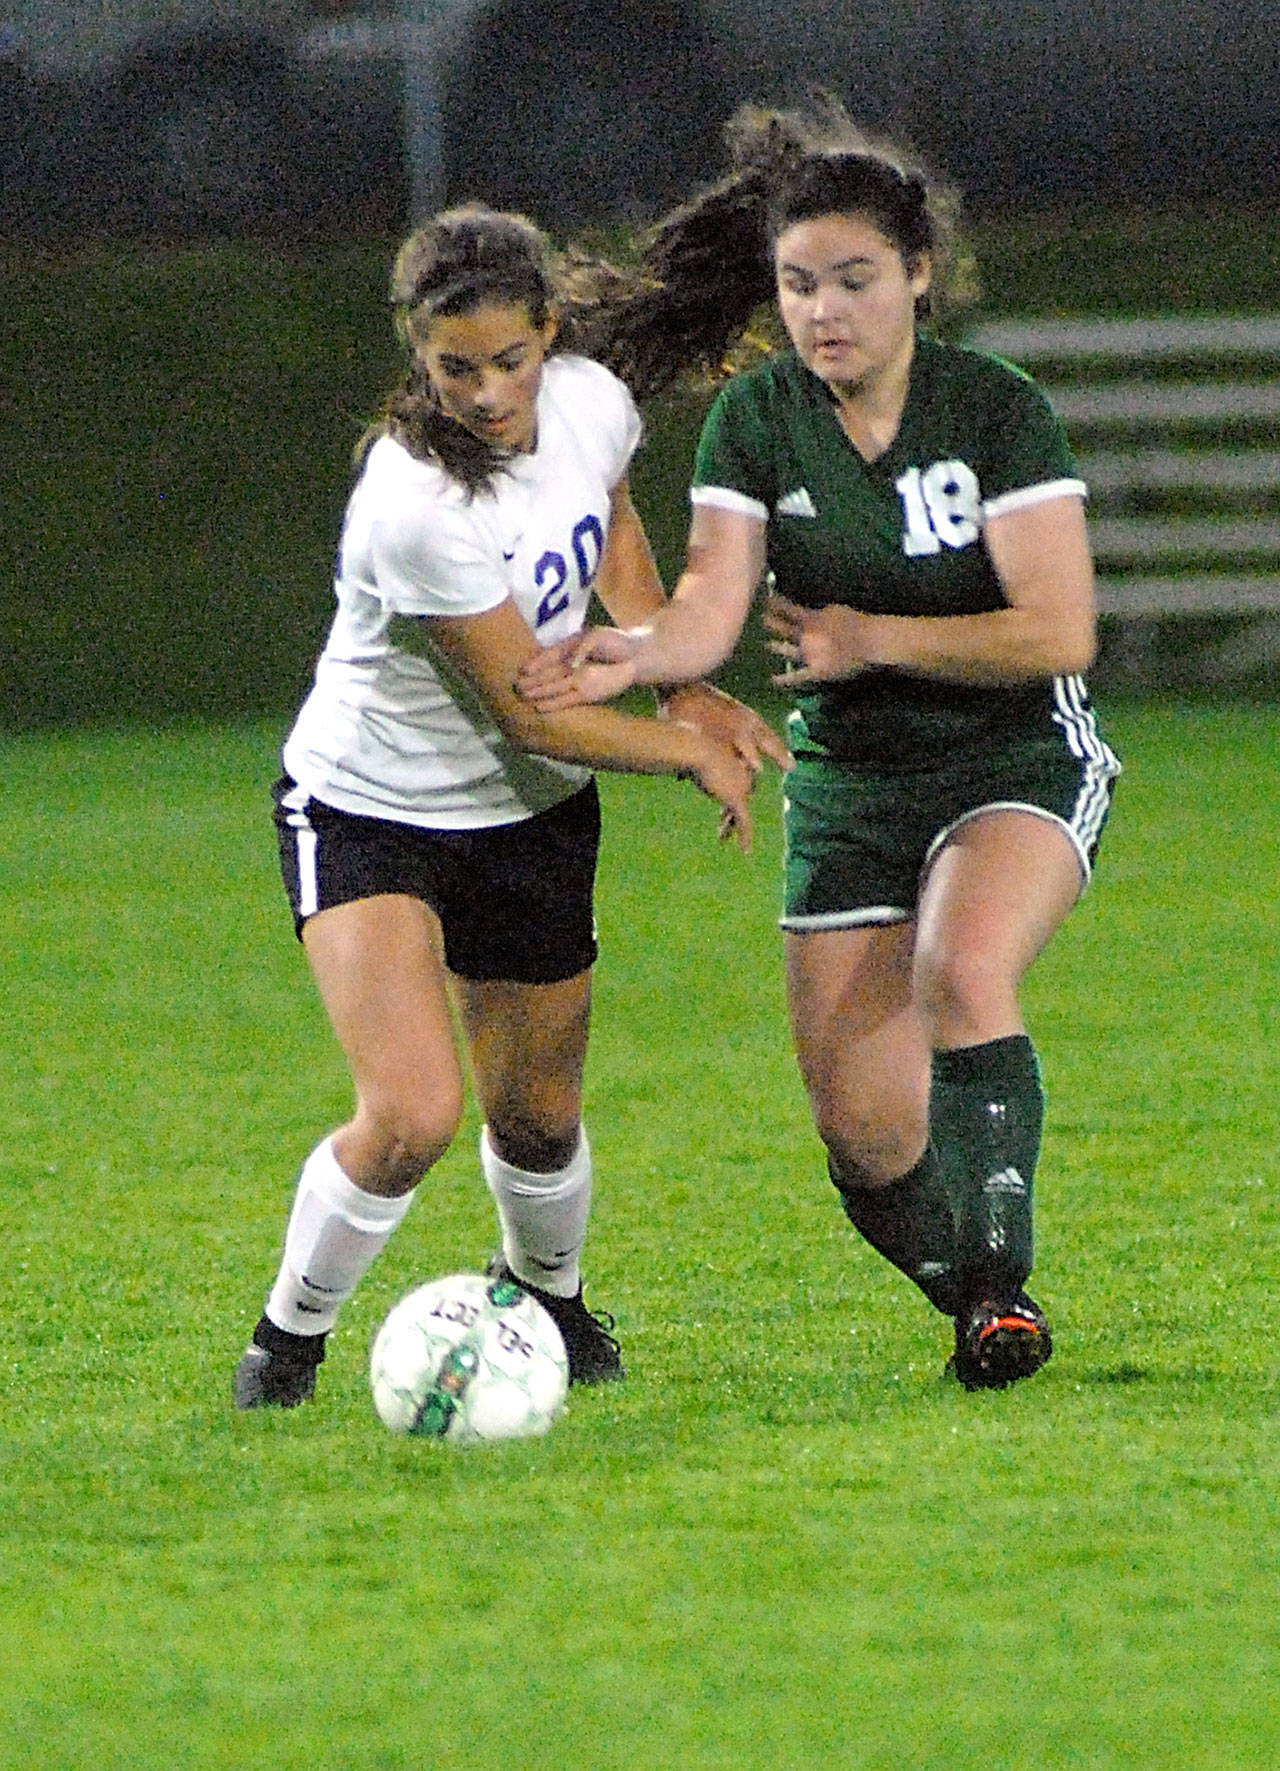 Keith Thorpe/Peninsula Daily News Sequim’s Hope Glasser, left, and Port Angeles’ Kiana Watson-Charles race to the ball during Tuesday night’s match at Port Angeles Civic Field.